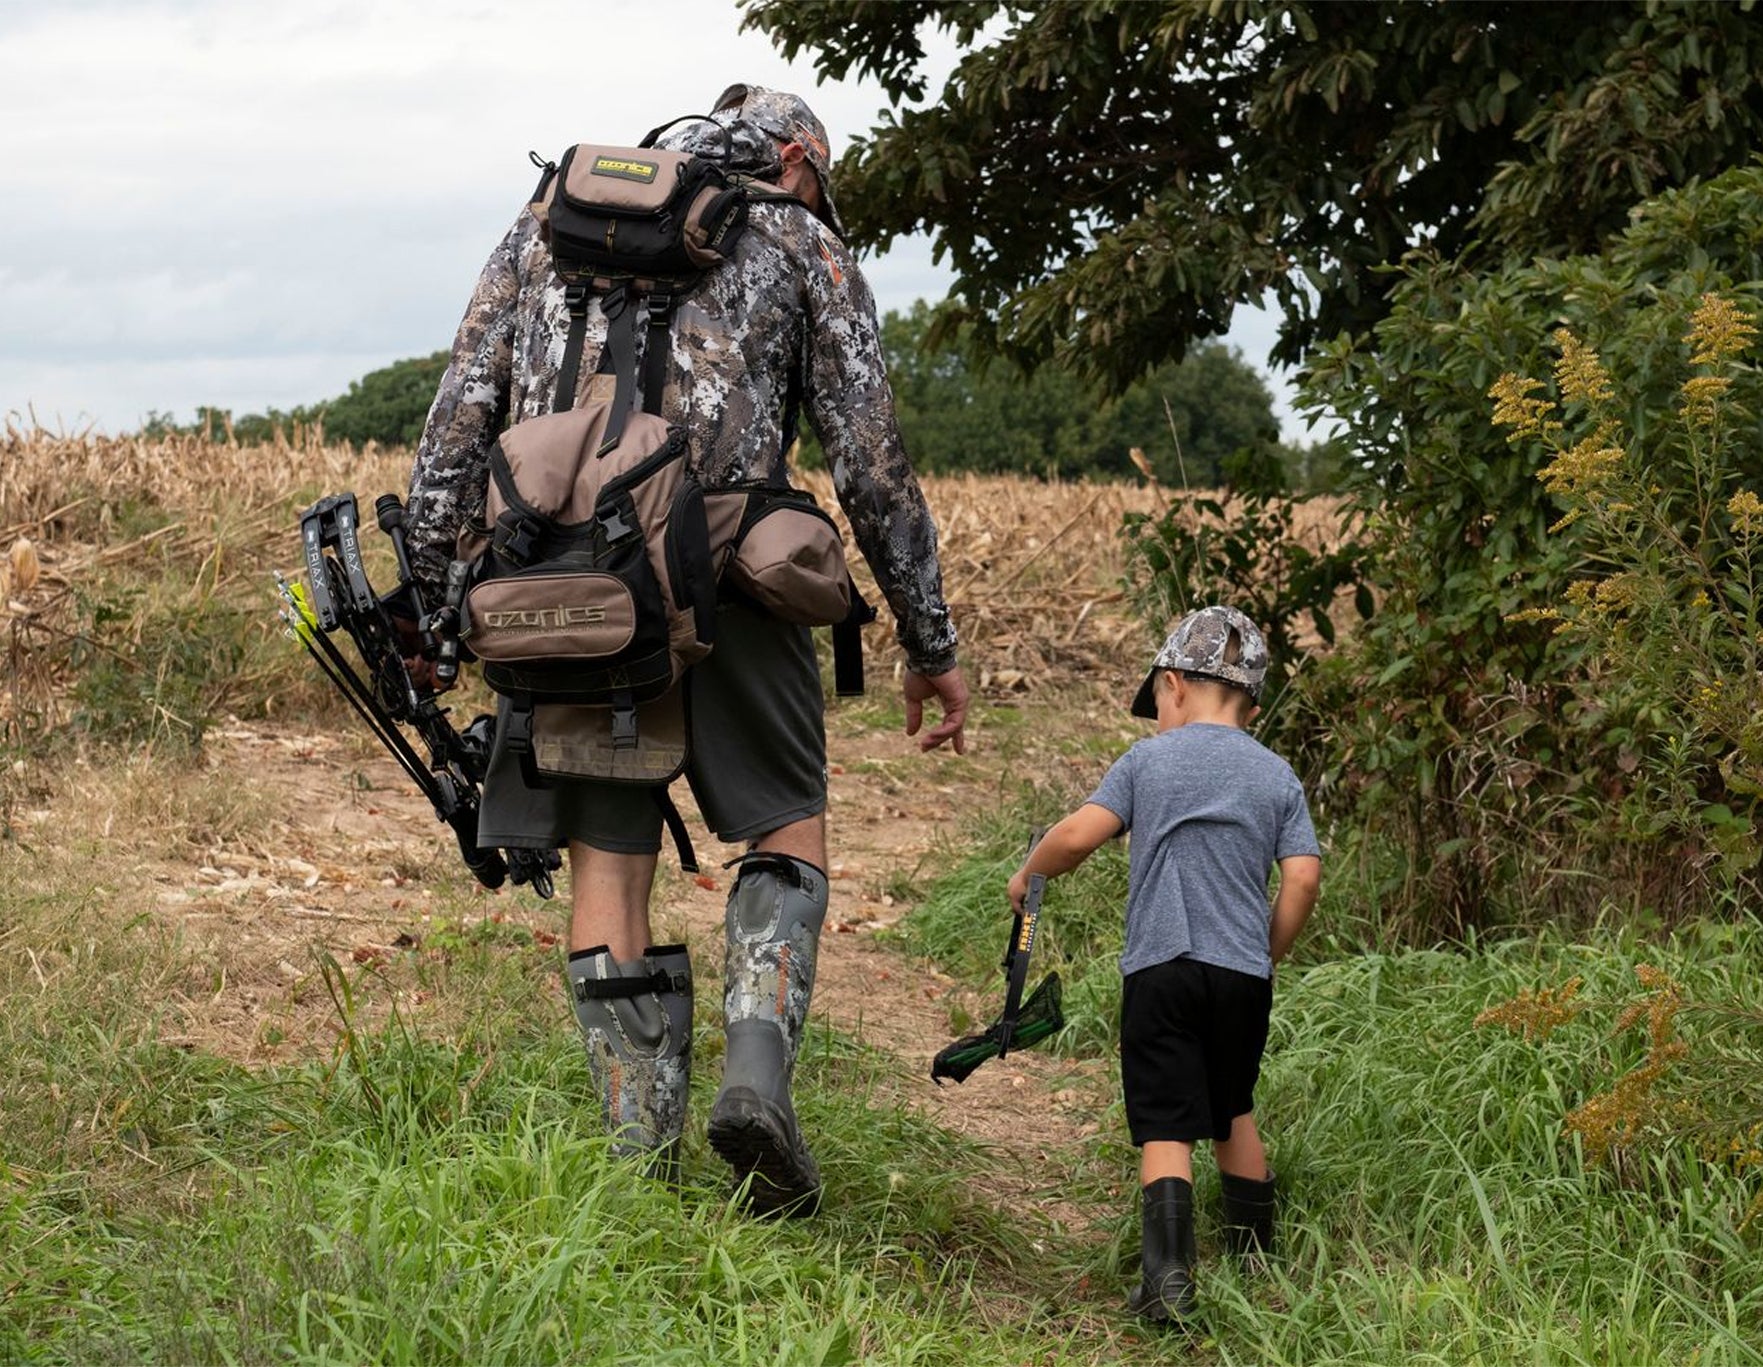 A Man With A Backpack And A Young Boy Walking Through A Field.